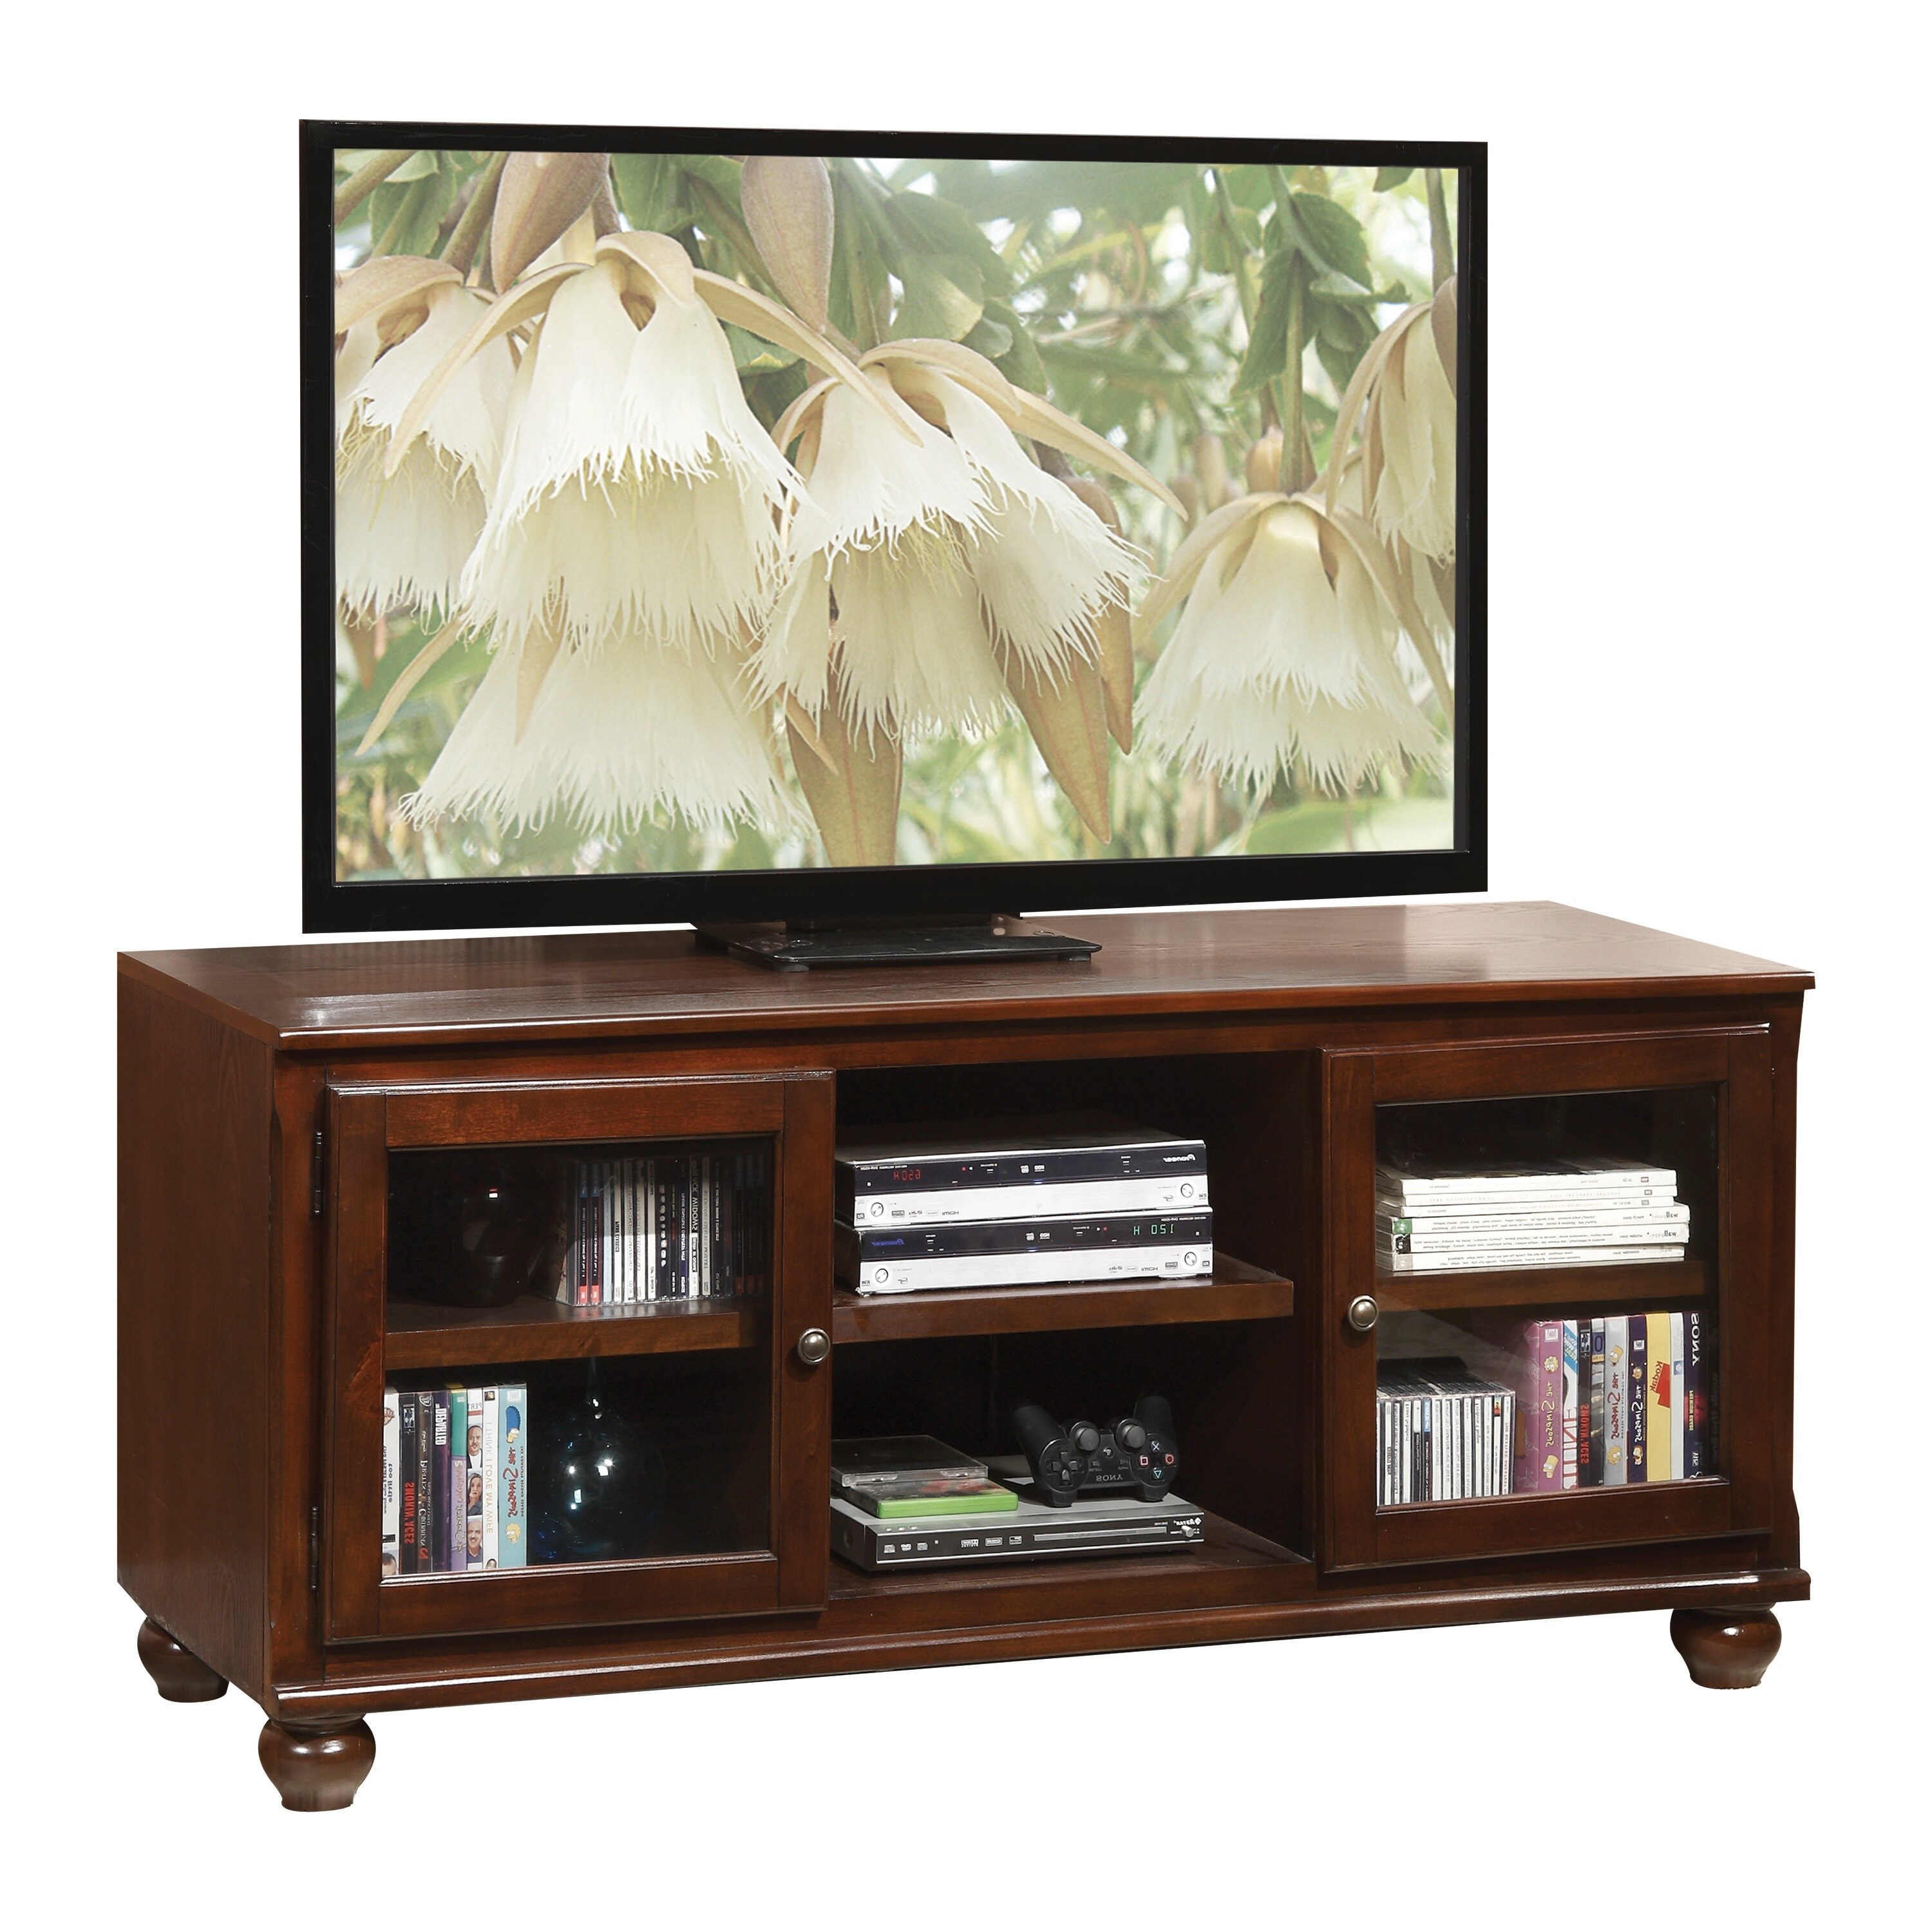 Vintage Wooden TV Stands with 2 Glass Doors & 2 Media Compartments, Recommended 59" Flat Panel TV